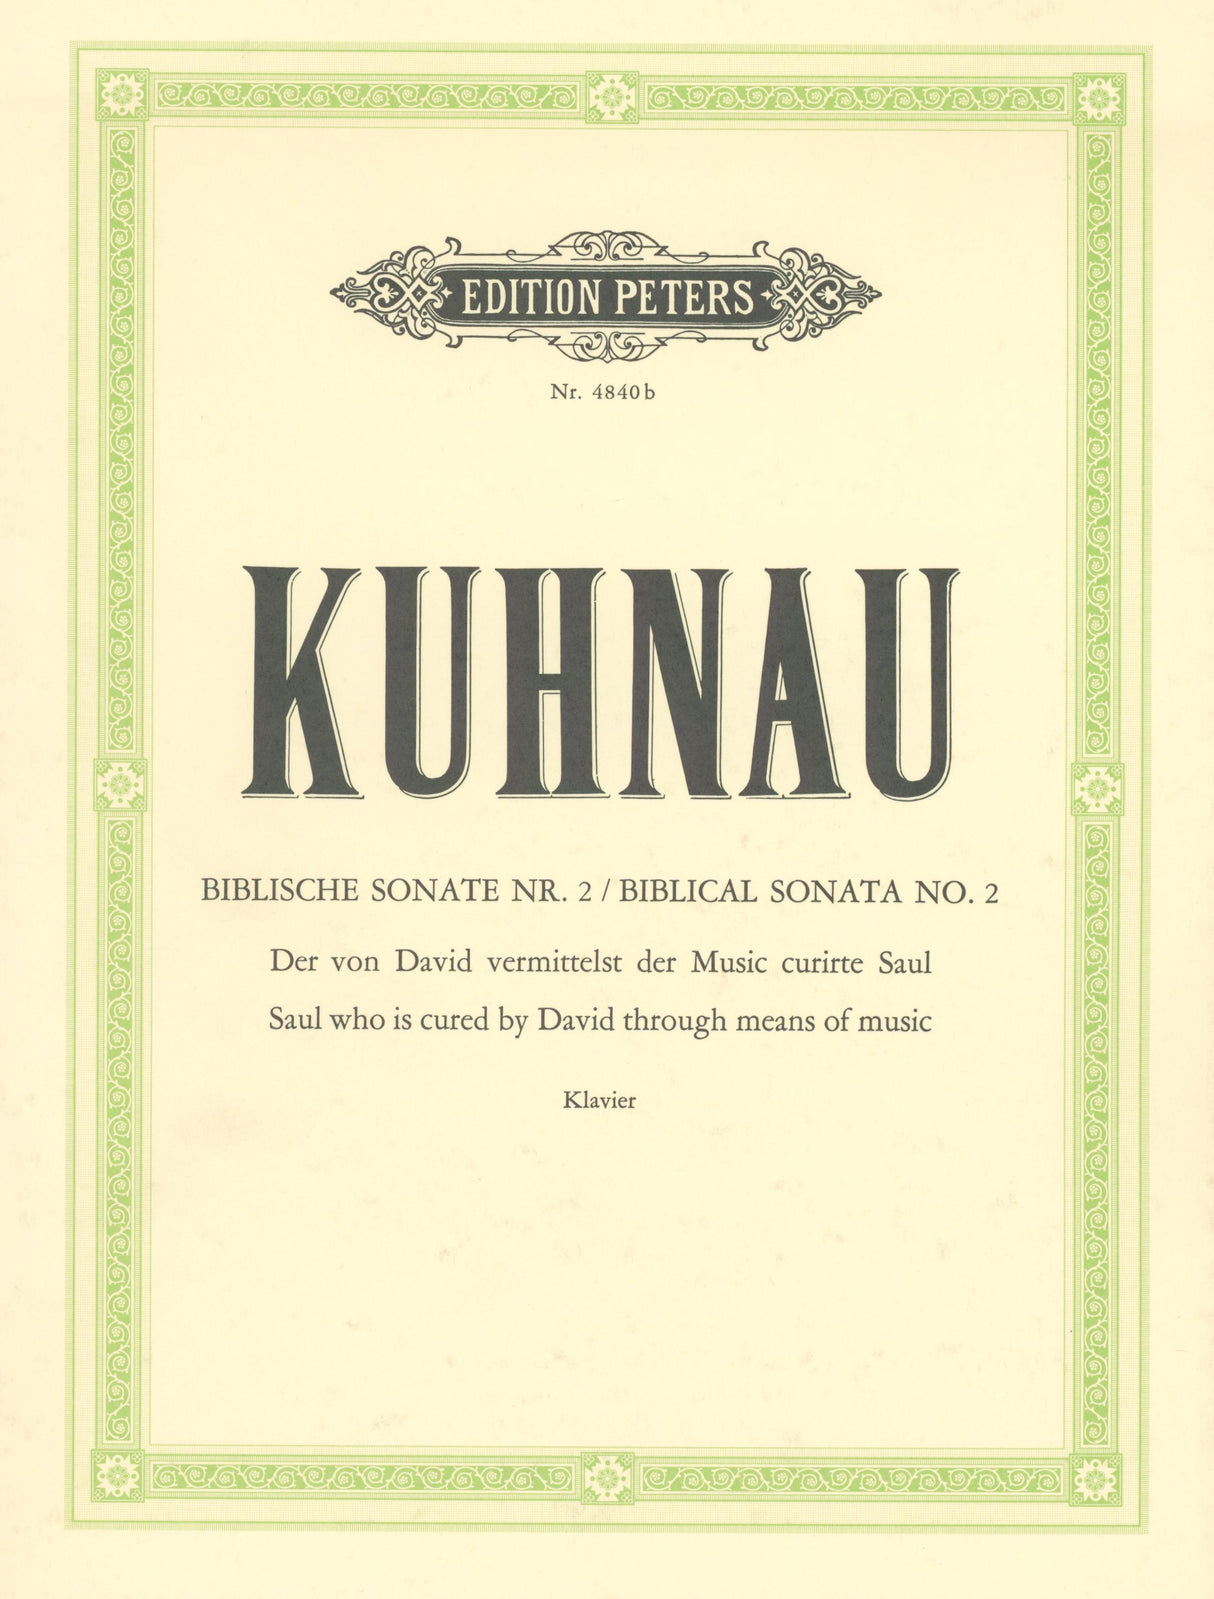 Kuhnau: Saul is Cured by David by Means of Music